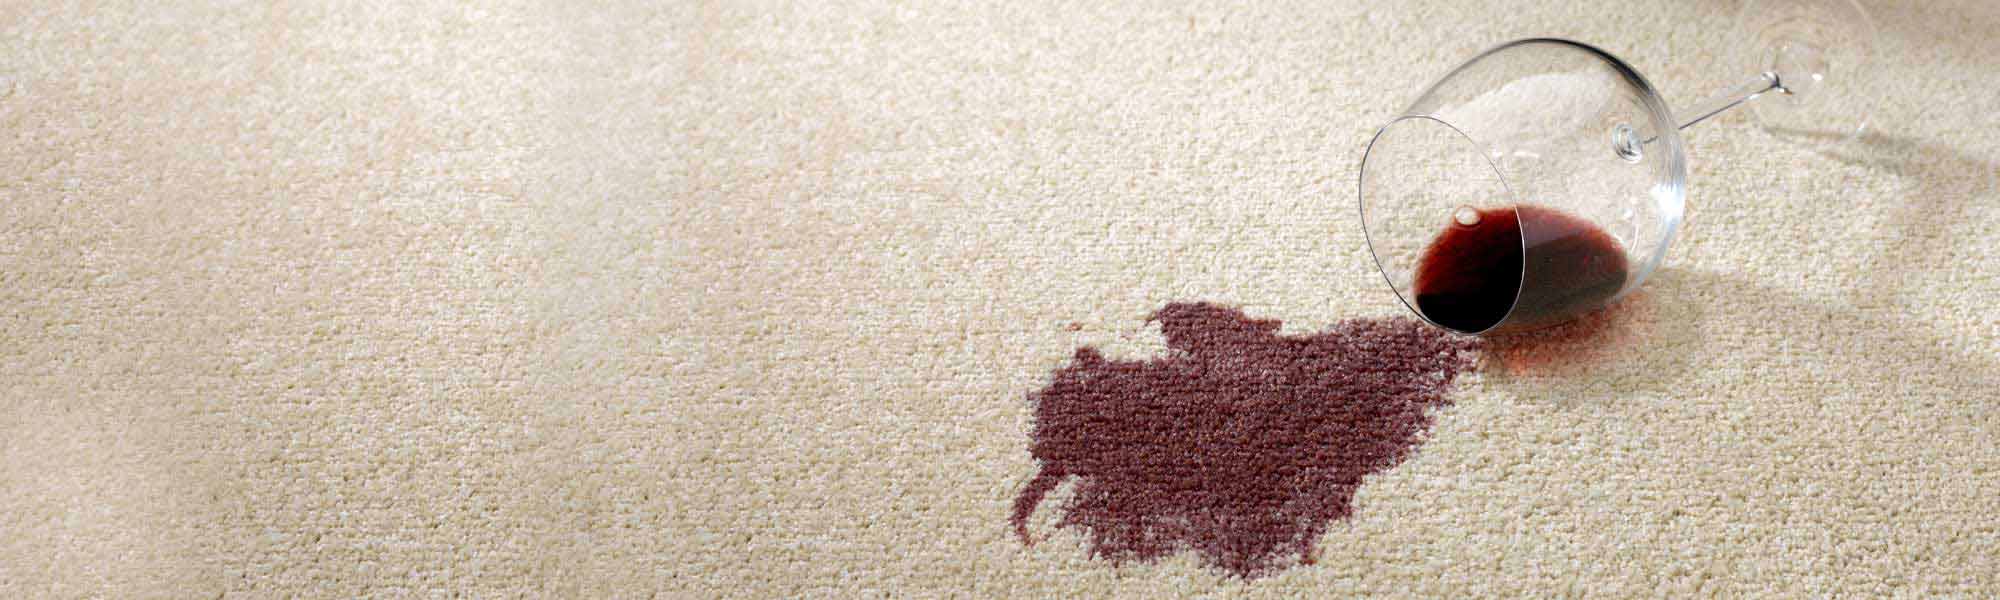 From ink to wine and coffee, glues or other seemingly permanent damage, Five Cities Chem-Dry can handle your specialty stains!